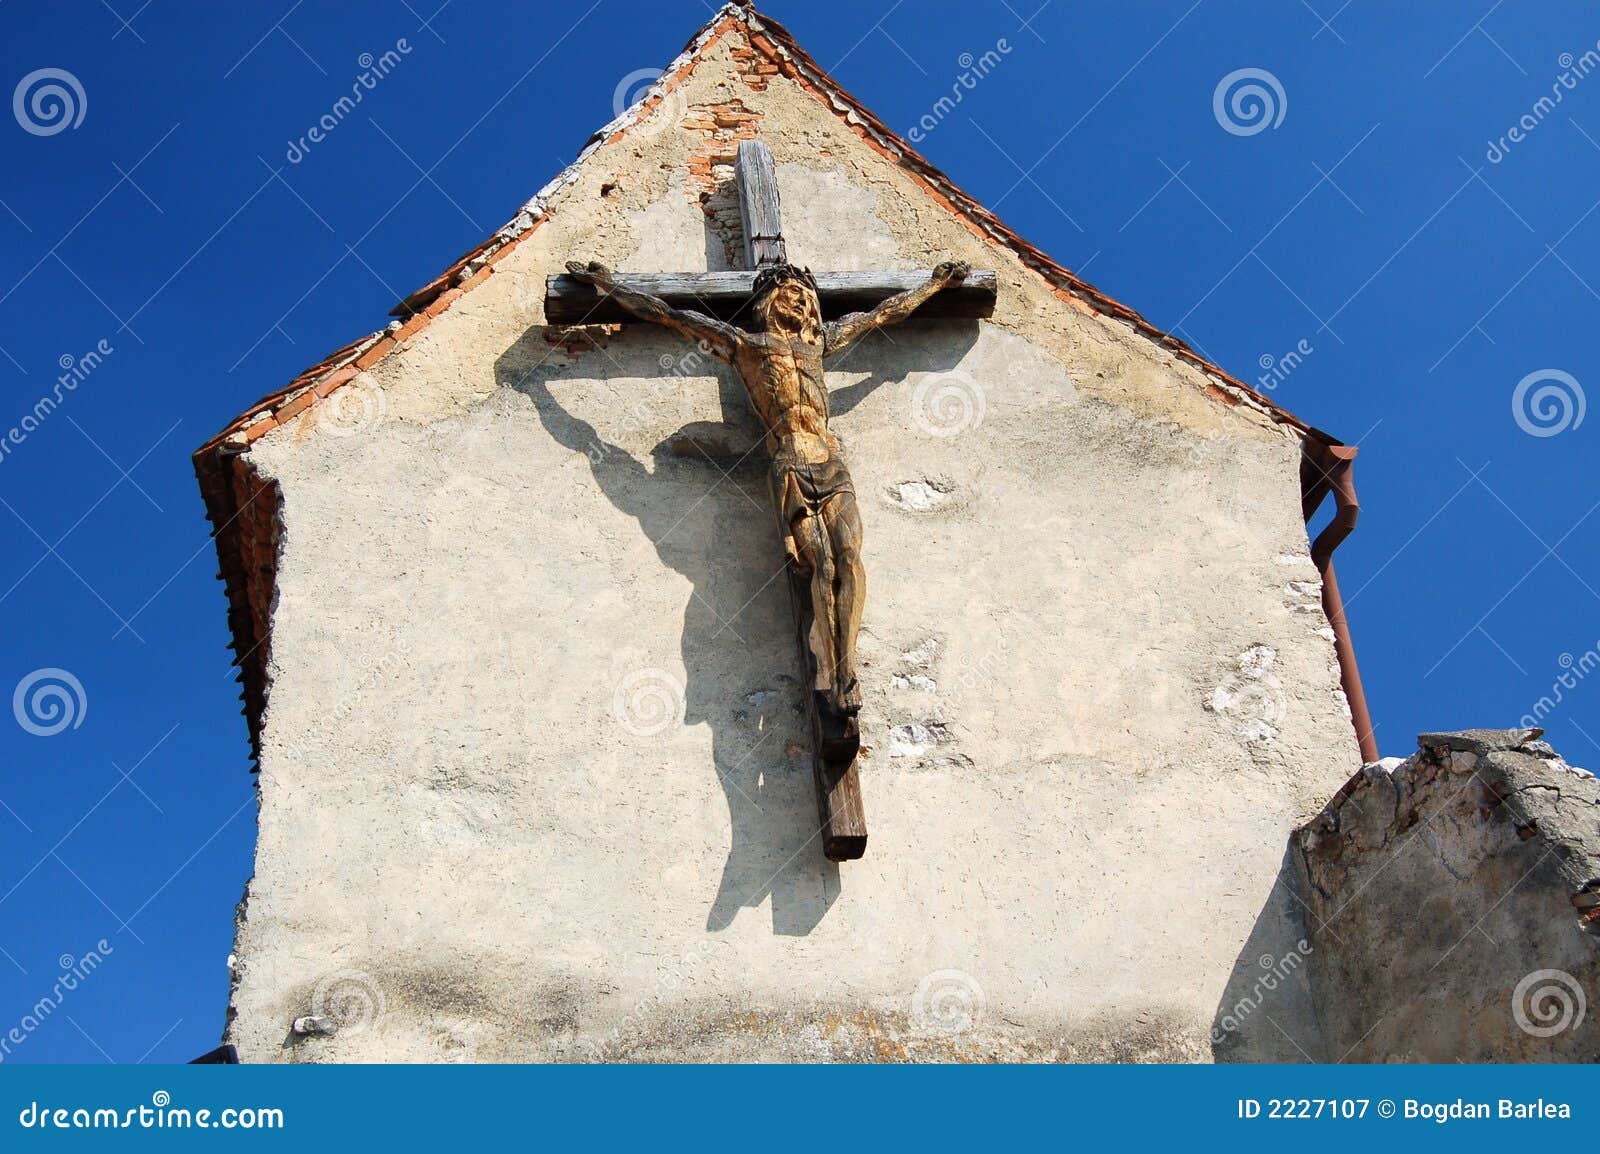 Statue Of Crucifixion Royalty Free Stock Photography - Image: 2227107